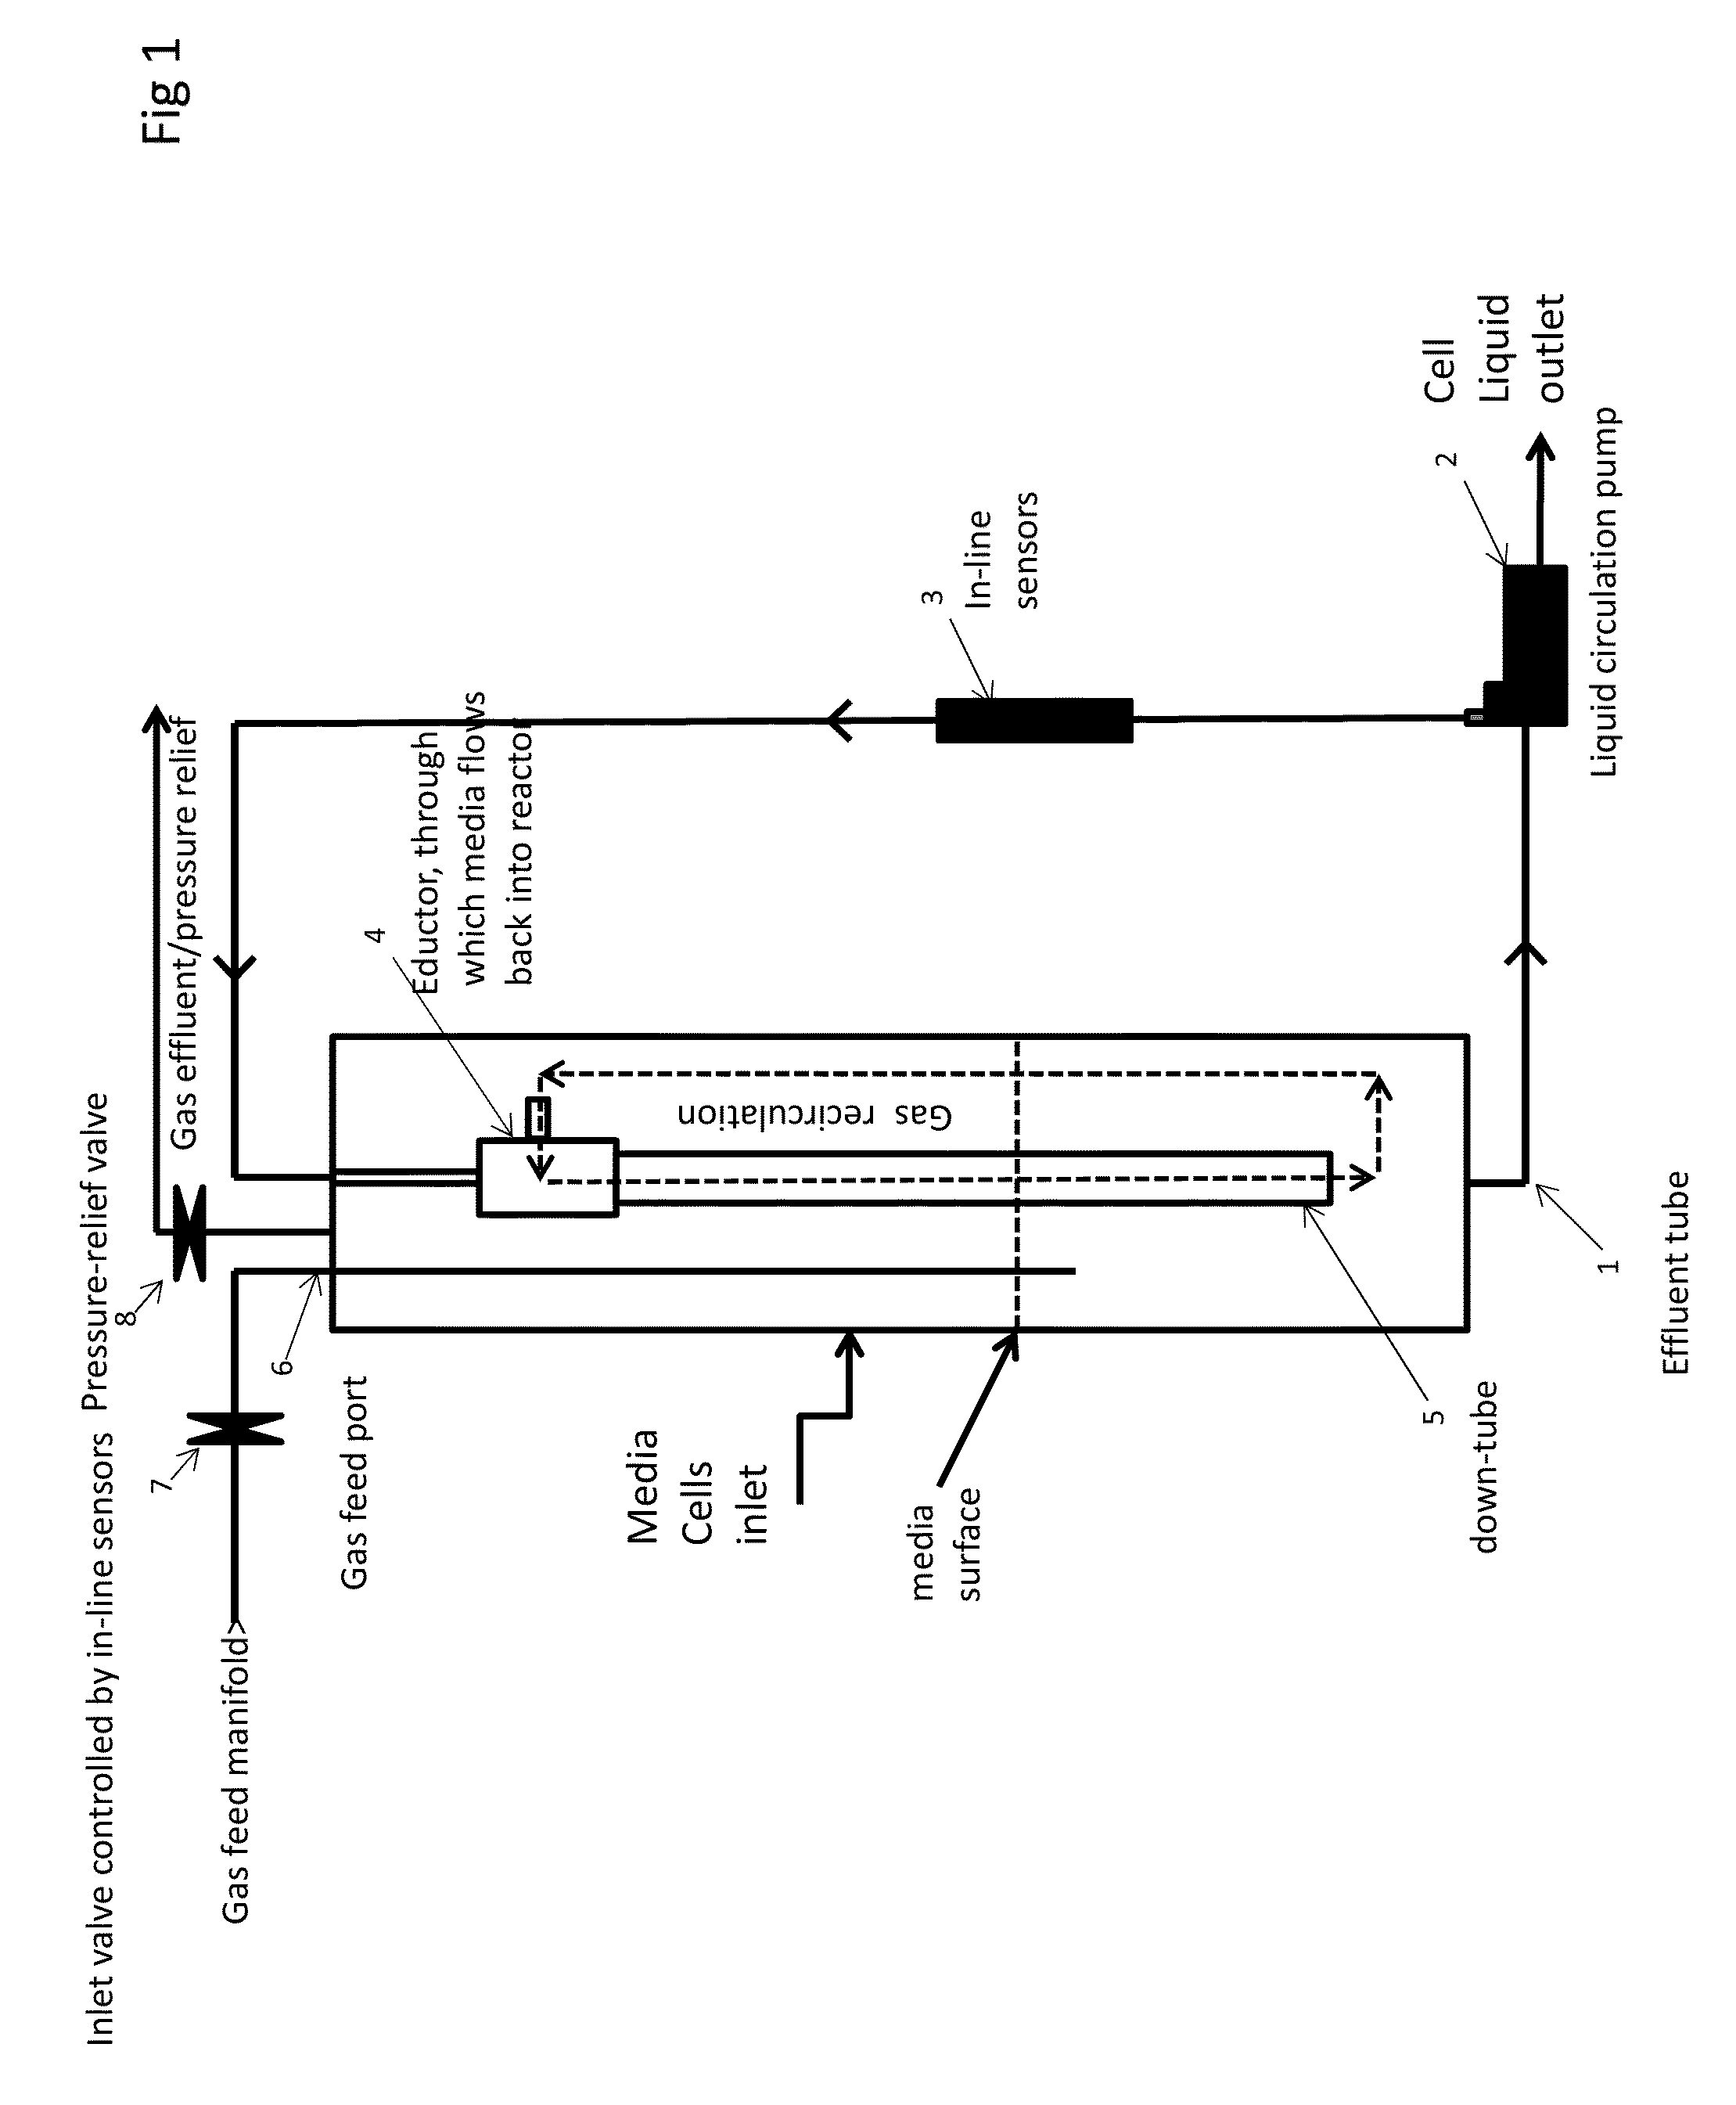 Method and apparatus for growing microbial cultures that require gaseous electron donors, electron acceptors, carbon sources, or other nutrients